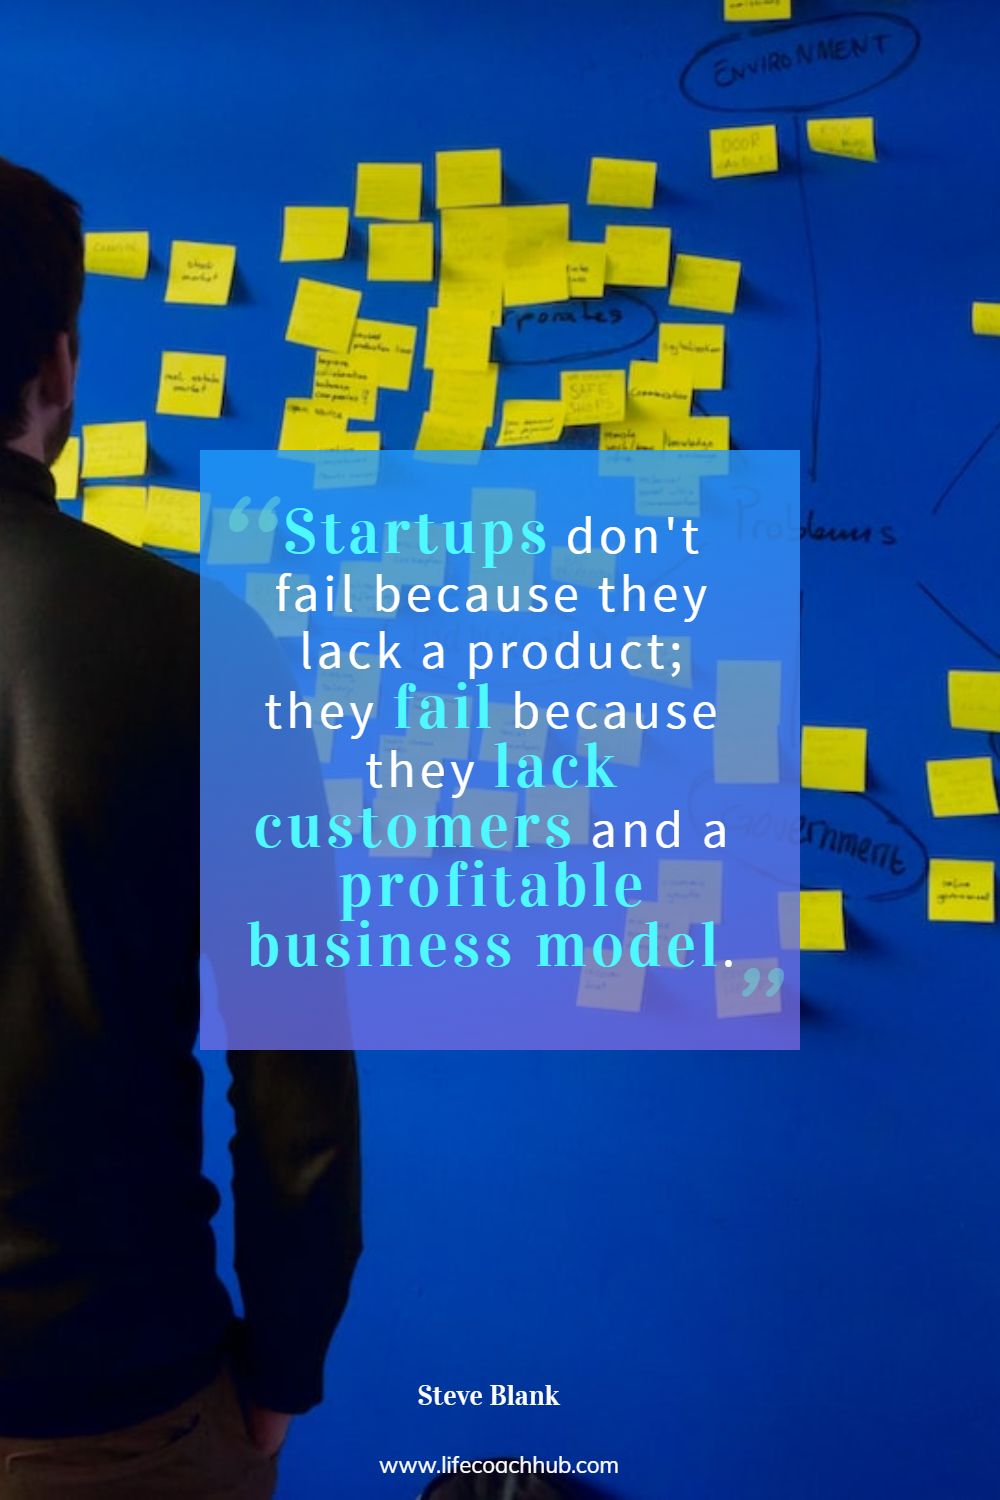 Startups don't fail because they lack a product; they fail because they lack customers and a profitable business model. Steve Blank Coaching Quote